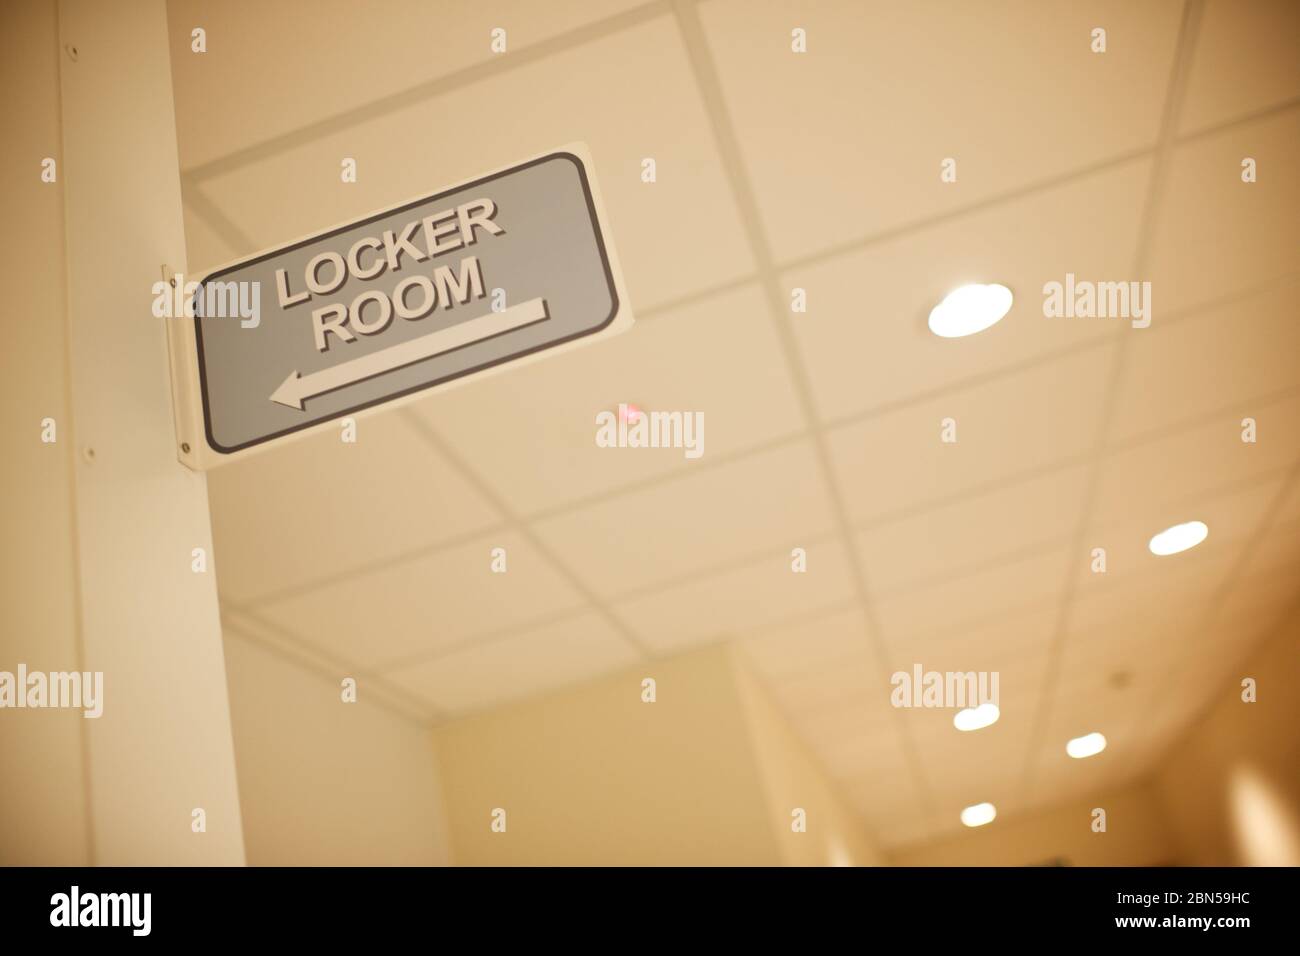 Beige locker room sign on a tiled wall inside a factory, Stock Photo